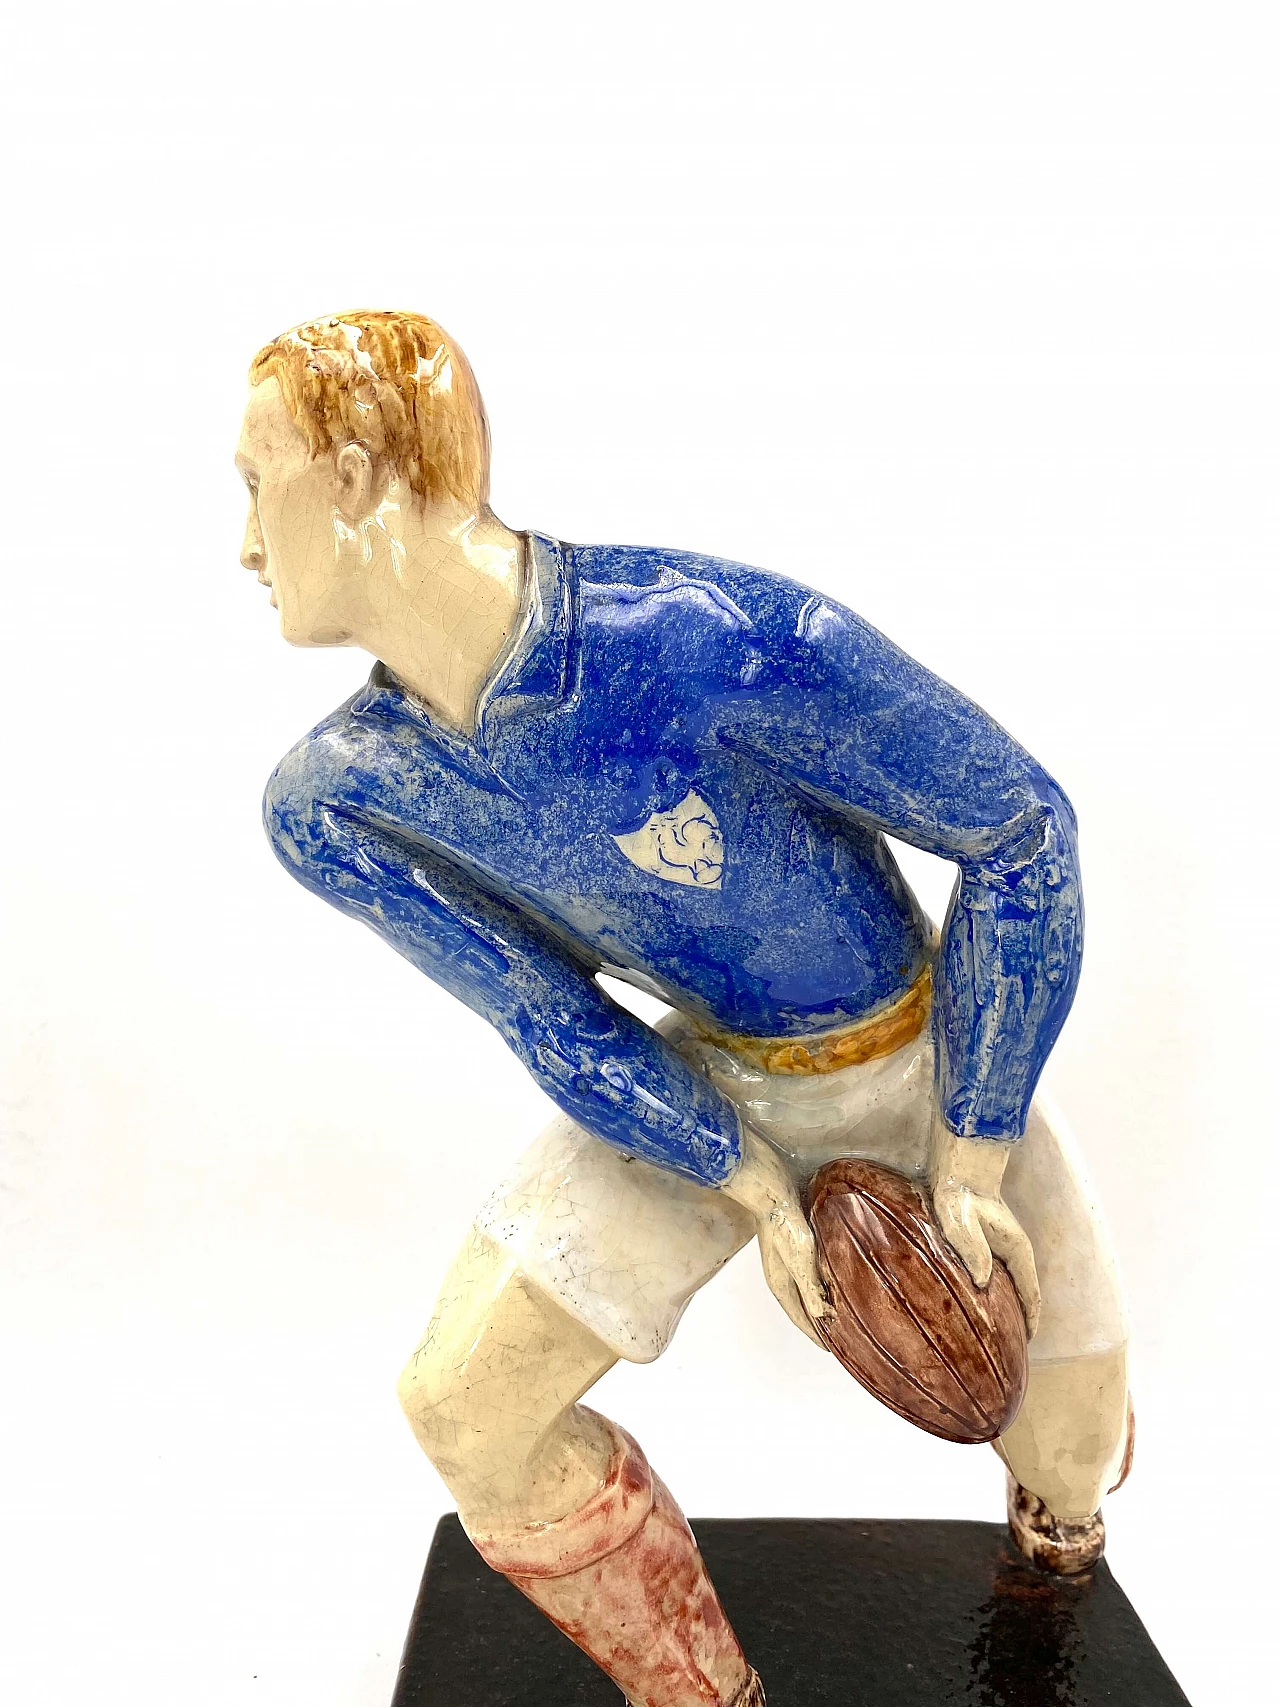 Willy Wuilleumier, scultura Les joueurs de rugby, GAM, Francia, 1940 1277370